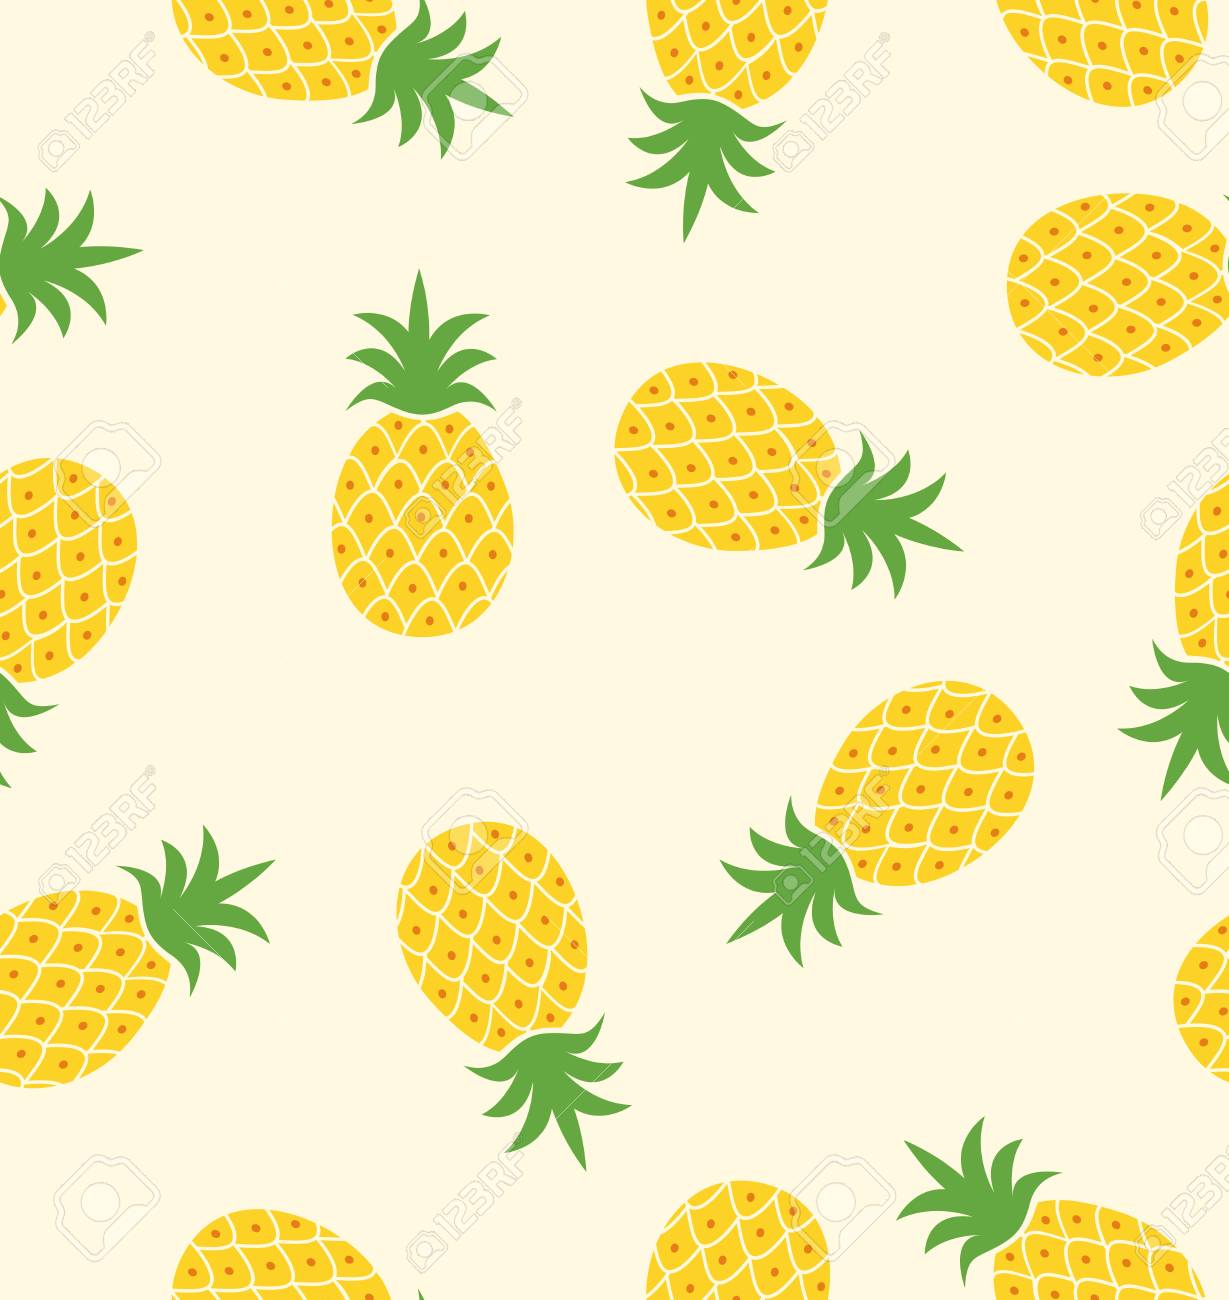 Seamless Pineapple Pattern Cute Doodle For